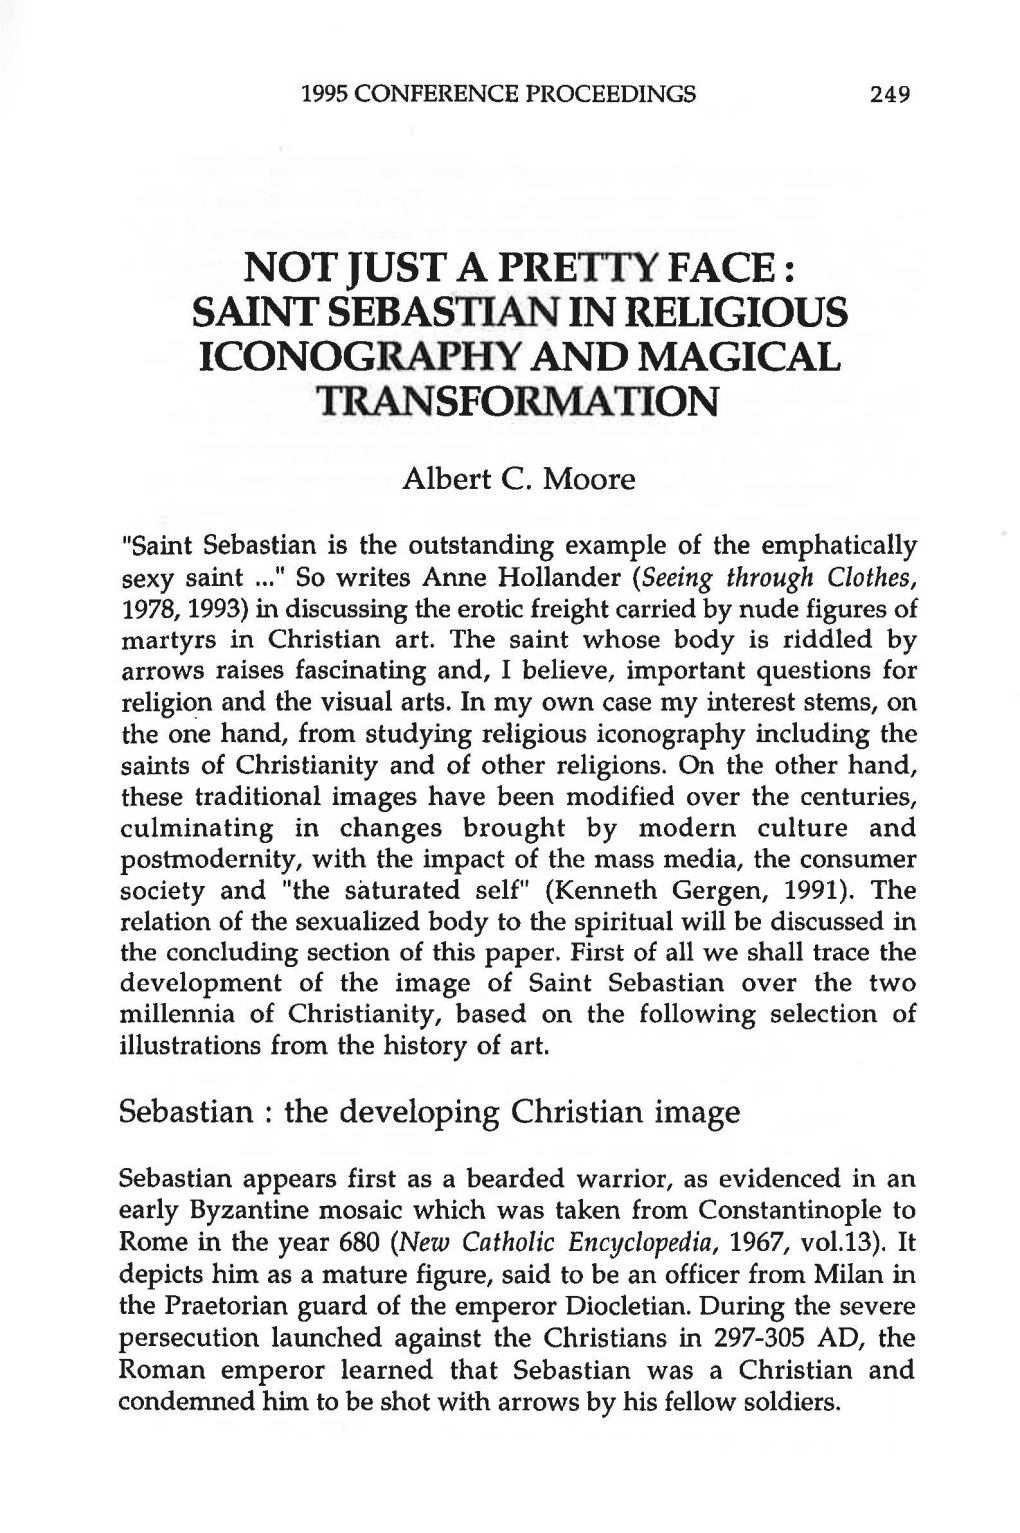 Saint Sebas11an in Religious Iconography and Magical Transformation